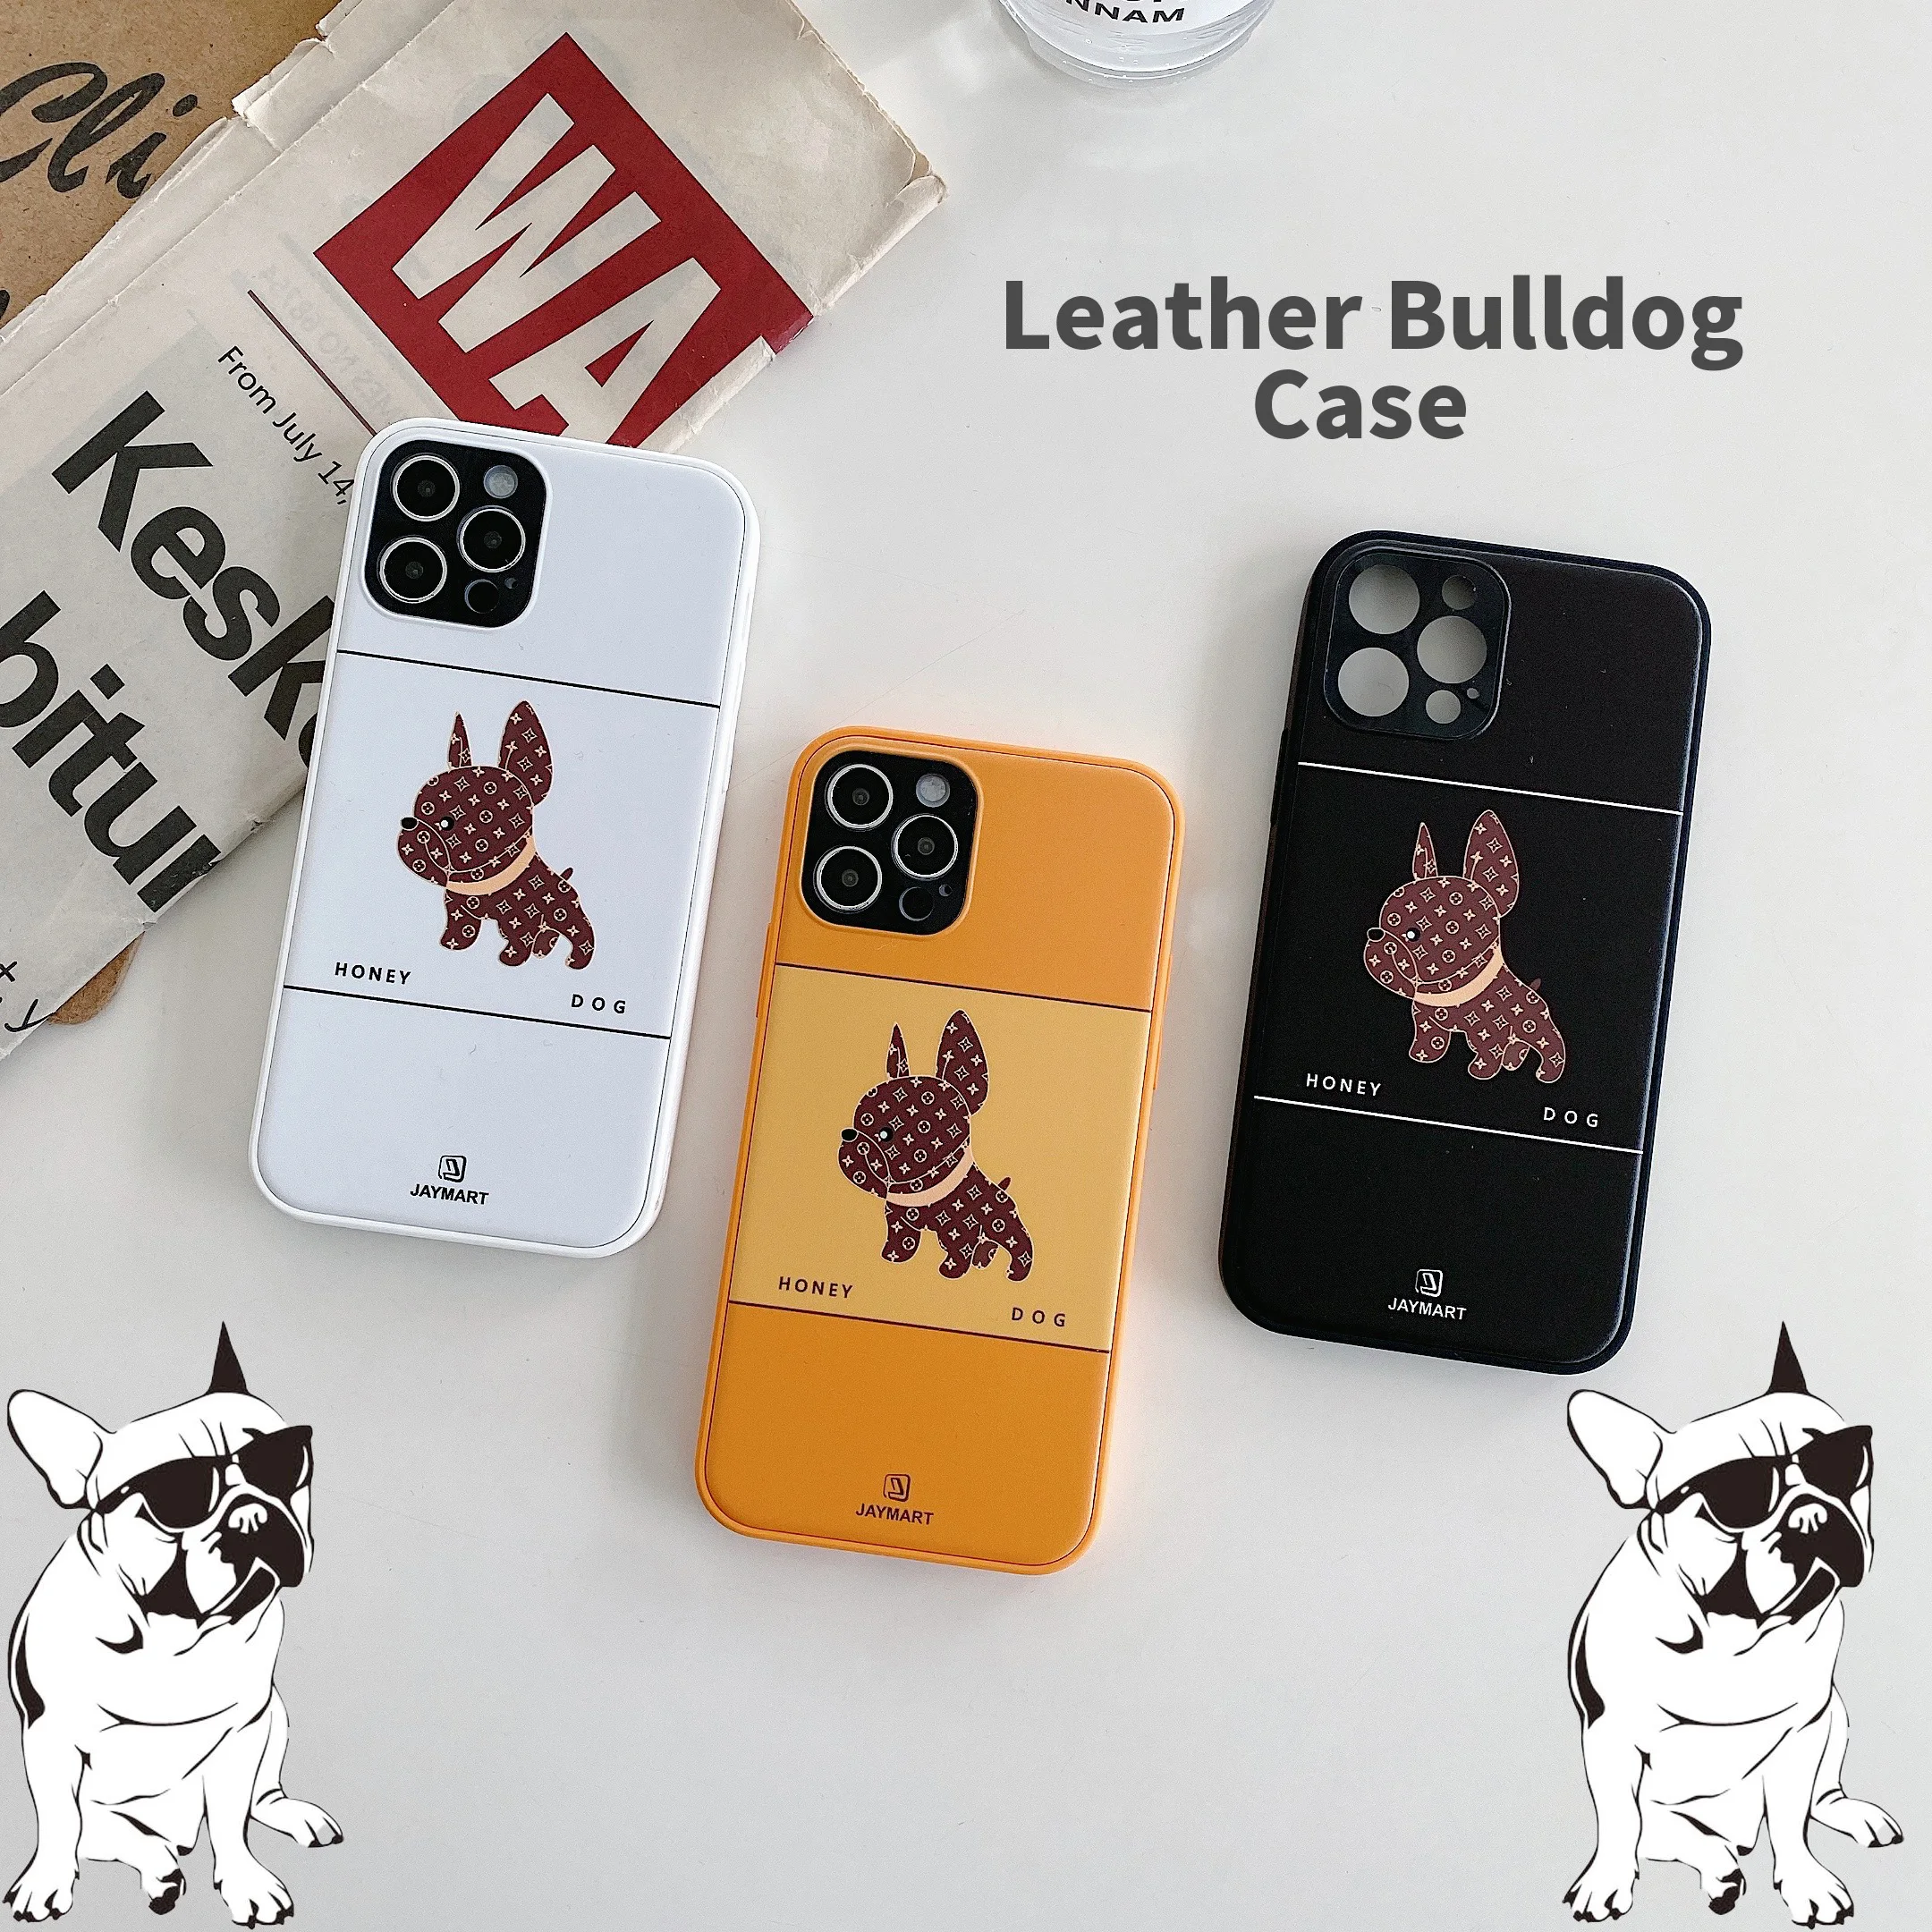 

Fashion Leather French Bulldog Phone Case for IPhone 11 12 Pro Max Mini 7 8 Plus XR X XS MAX Cute Cartoon INS hockproof Cover